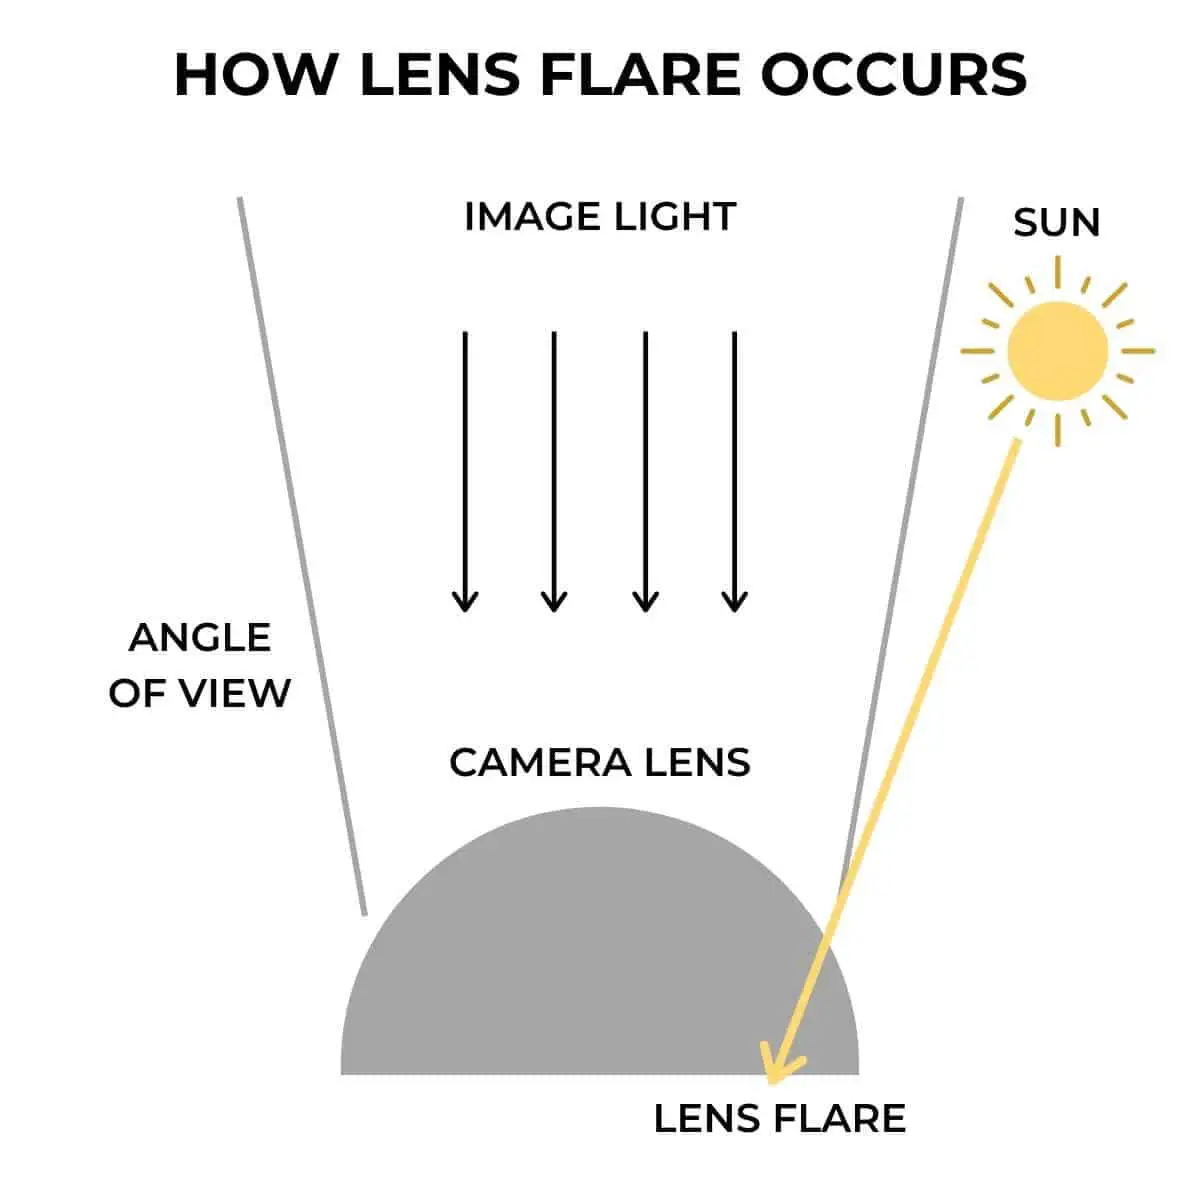 Diagram of how lens flare occurs.